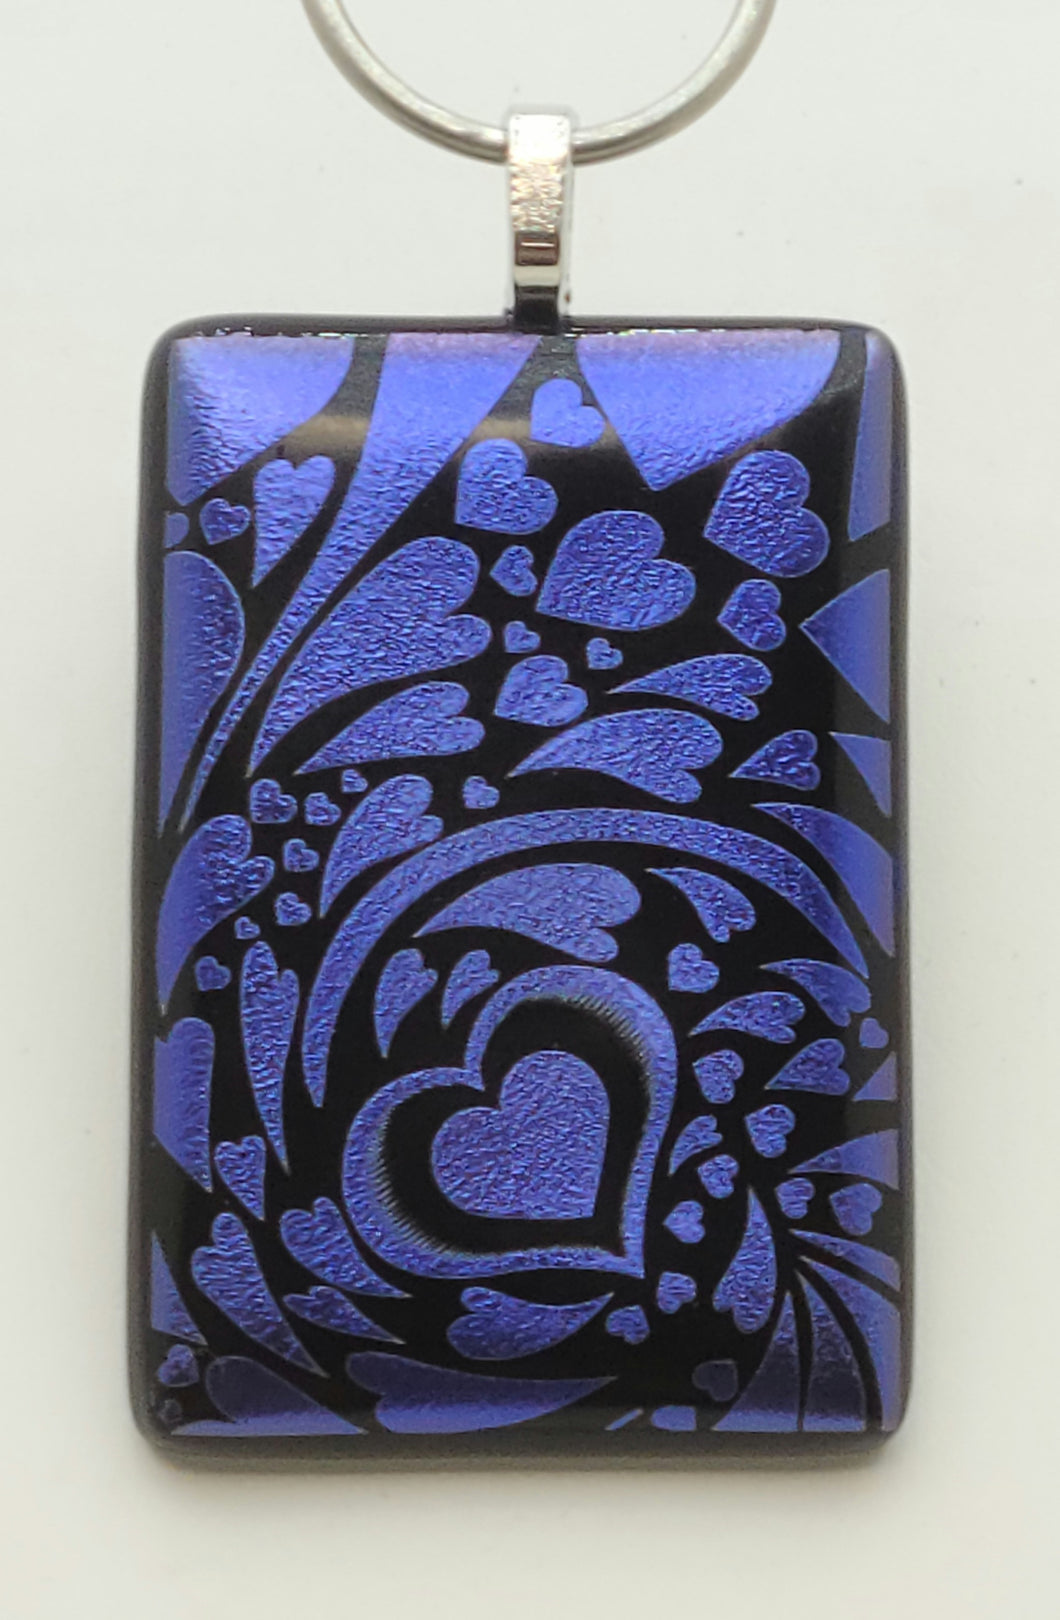 Swirling hearts surround a focal heart in this gorgeous etched purple dichroic glass statement fused glass pendant!